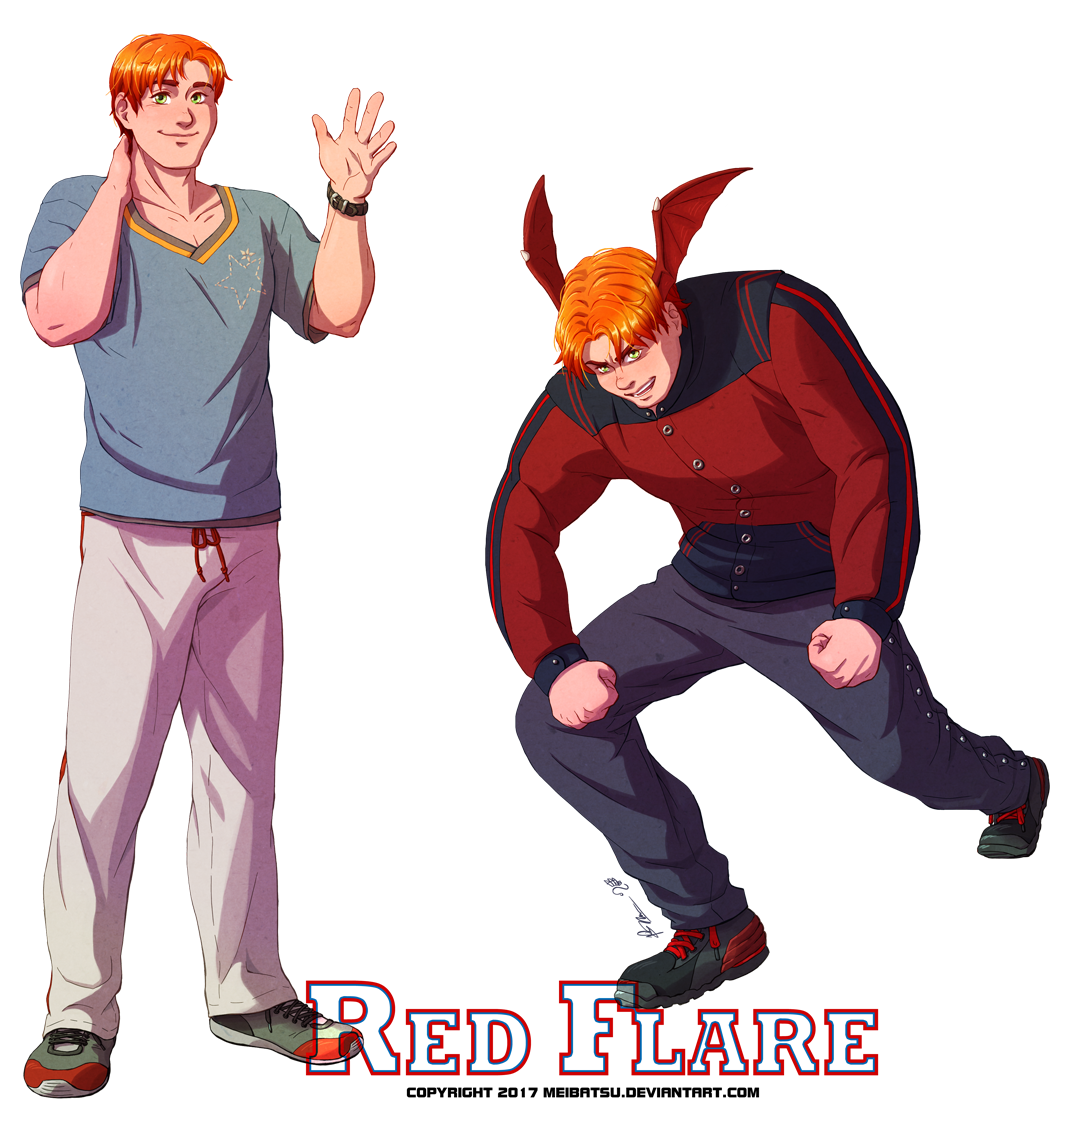 _s2__red_flare___hot_headed_hunk_by_meibatsu-dbspyvi.png